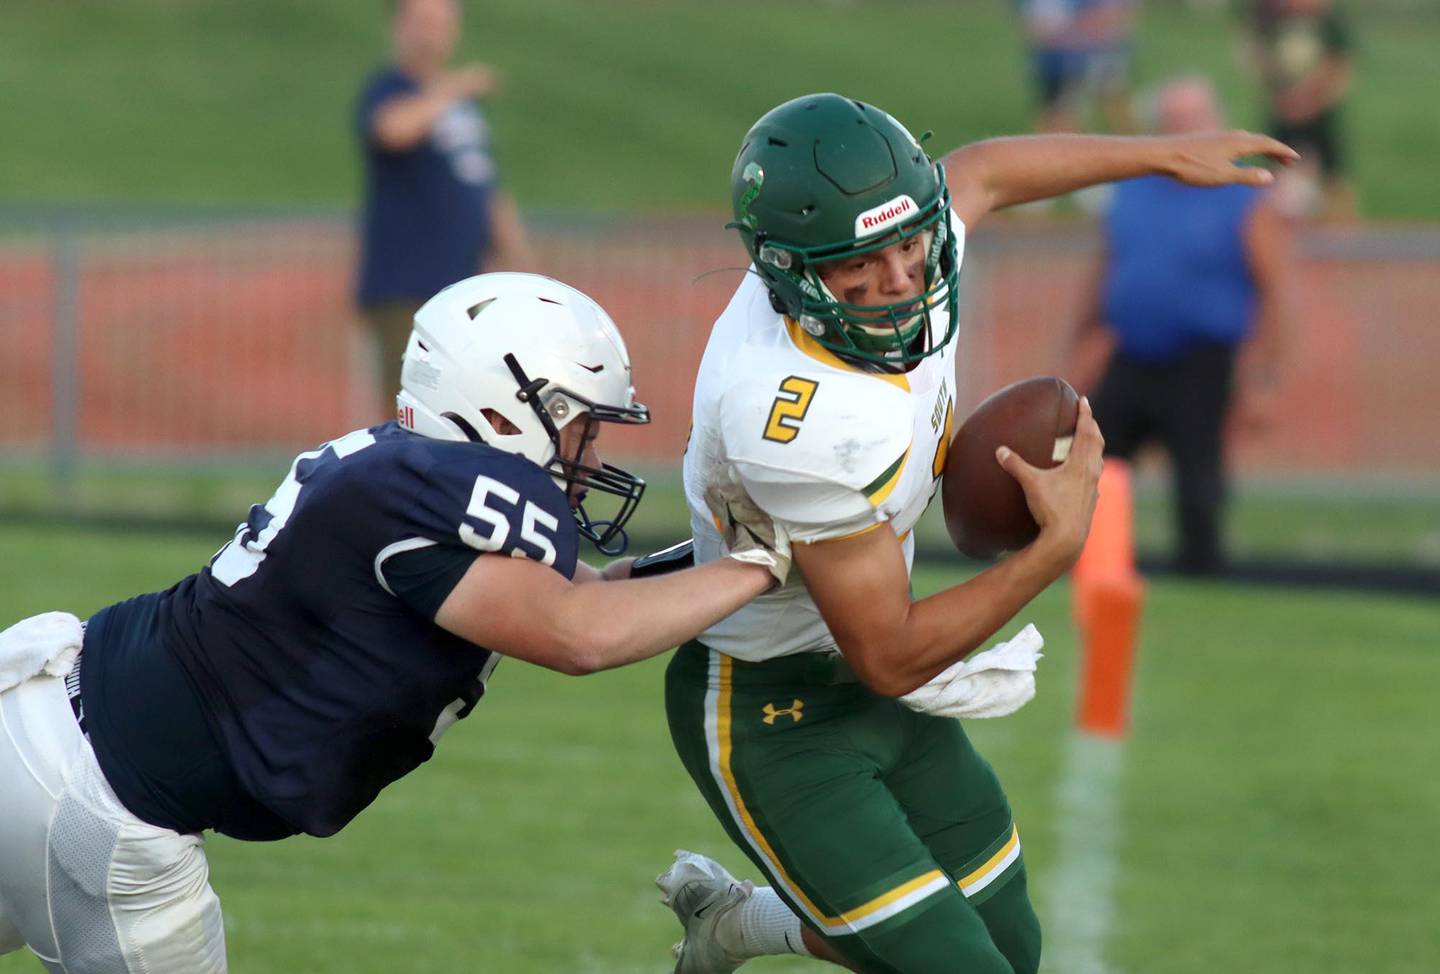 Crystal Lake South’s Caden Casimino is pushed out of bounds by Cary-Grove’s Thomas Burton, left, at Al Bohrer Field on the campus of Cary-Grove High School Friday night.